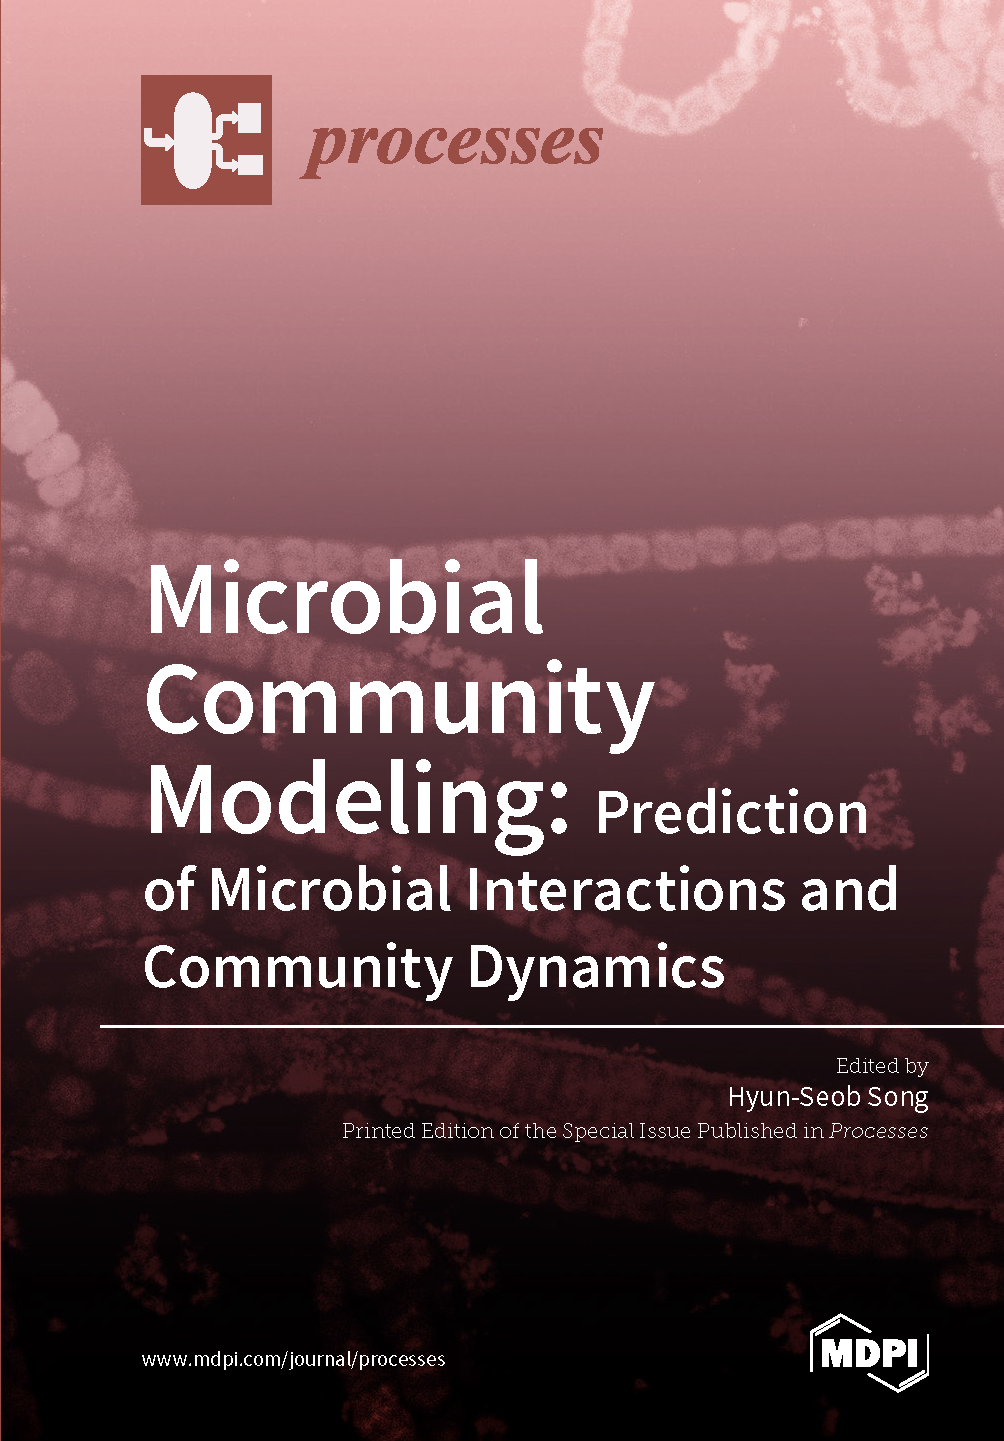 Microbial Community Modeling: Prediction of Microbial Interactions and Community Dynamics